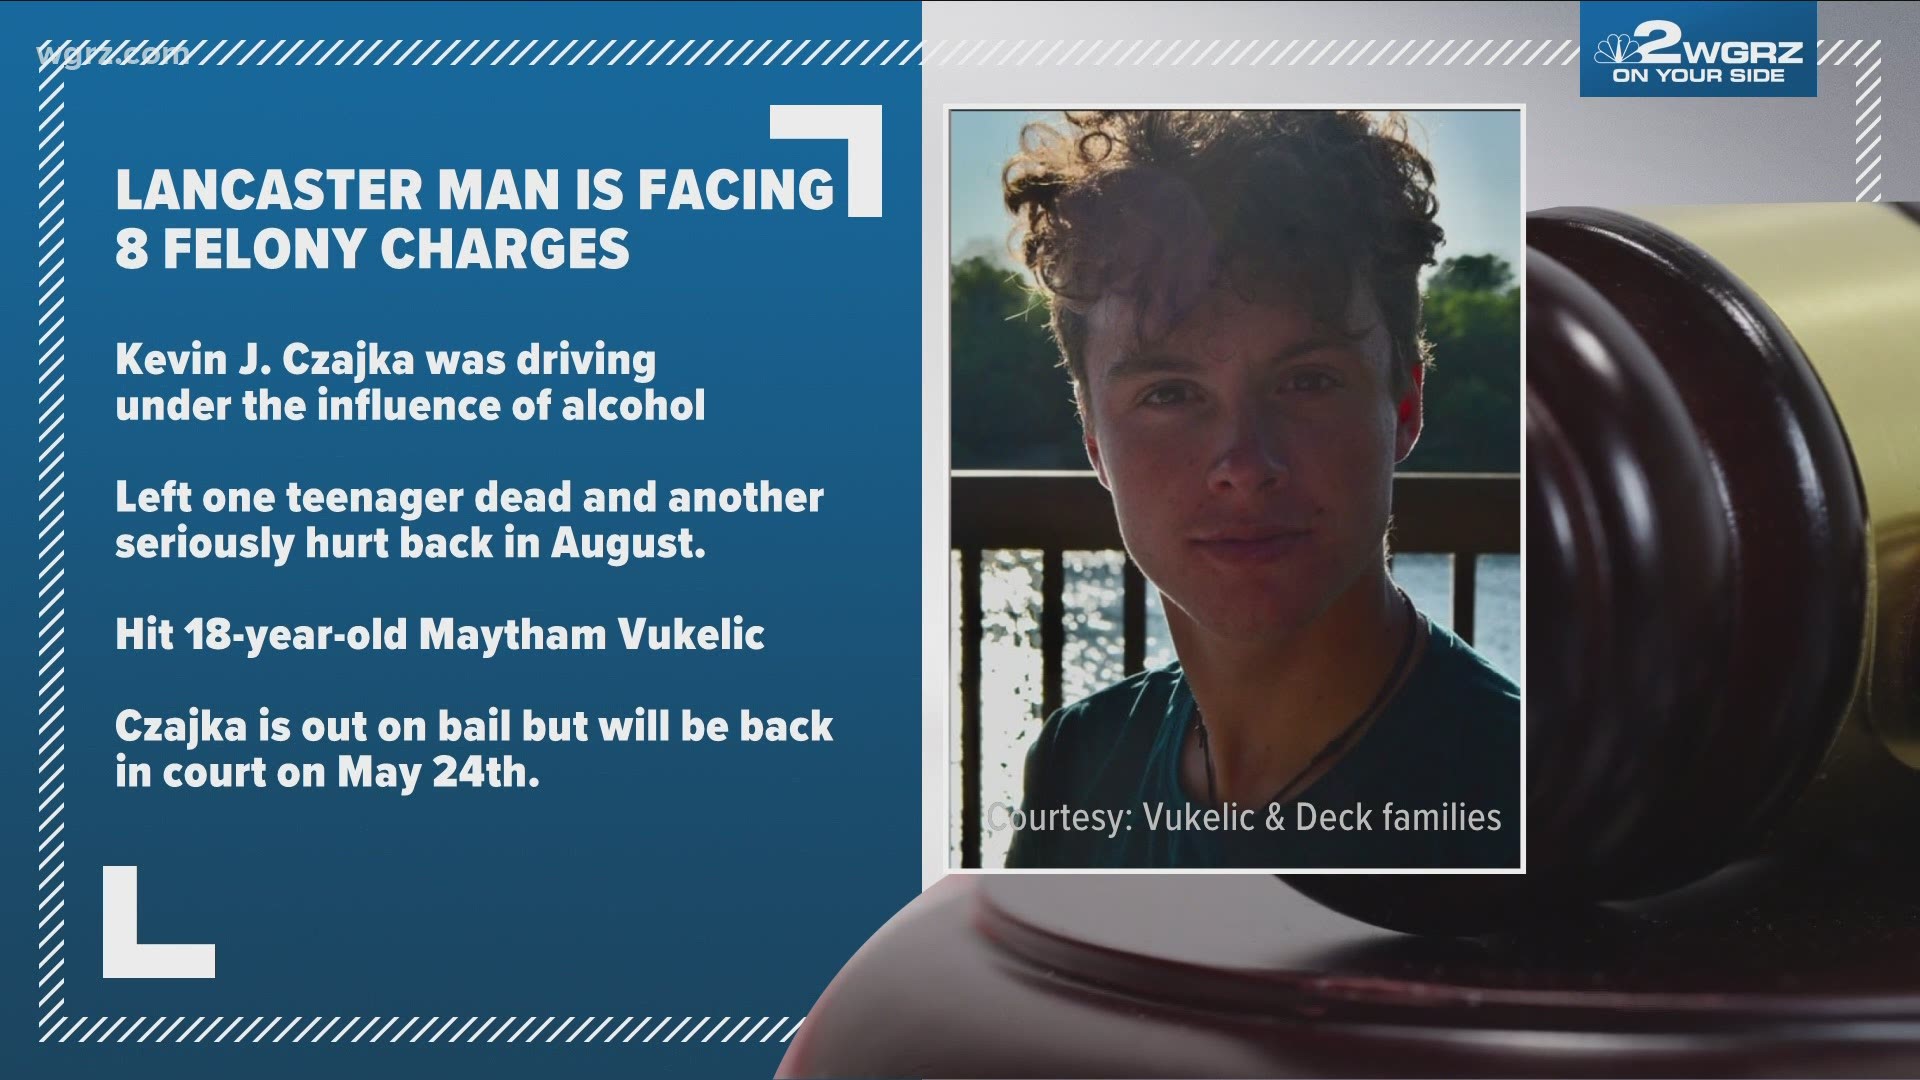 Investigators say 53-year-old Kevin J. Czajka was driving under the influence of alcohol... when he hit 18-year-old Maytham Vukelic, of East Aurora back in August.